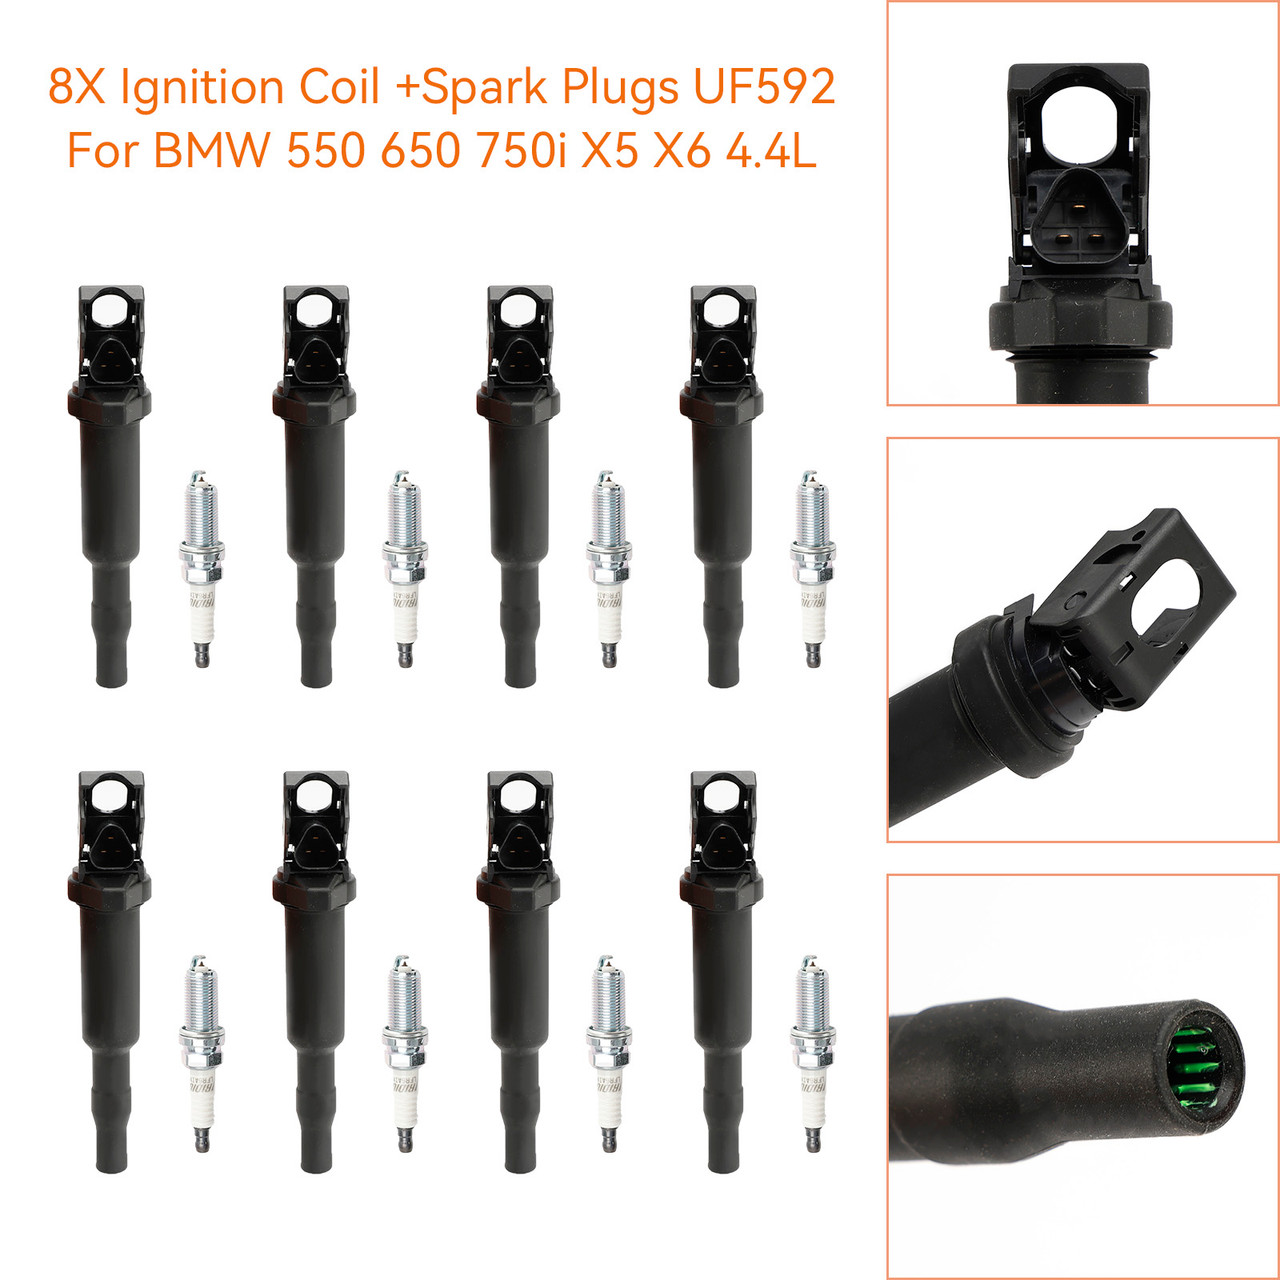 2012-2016 BMW 650i 4.4L 8X Ignition Coil +Spark Plugs UF592, UF-592 Generic